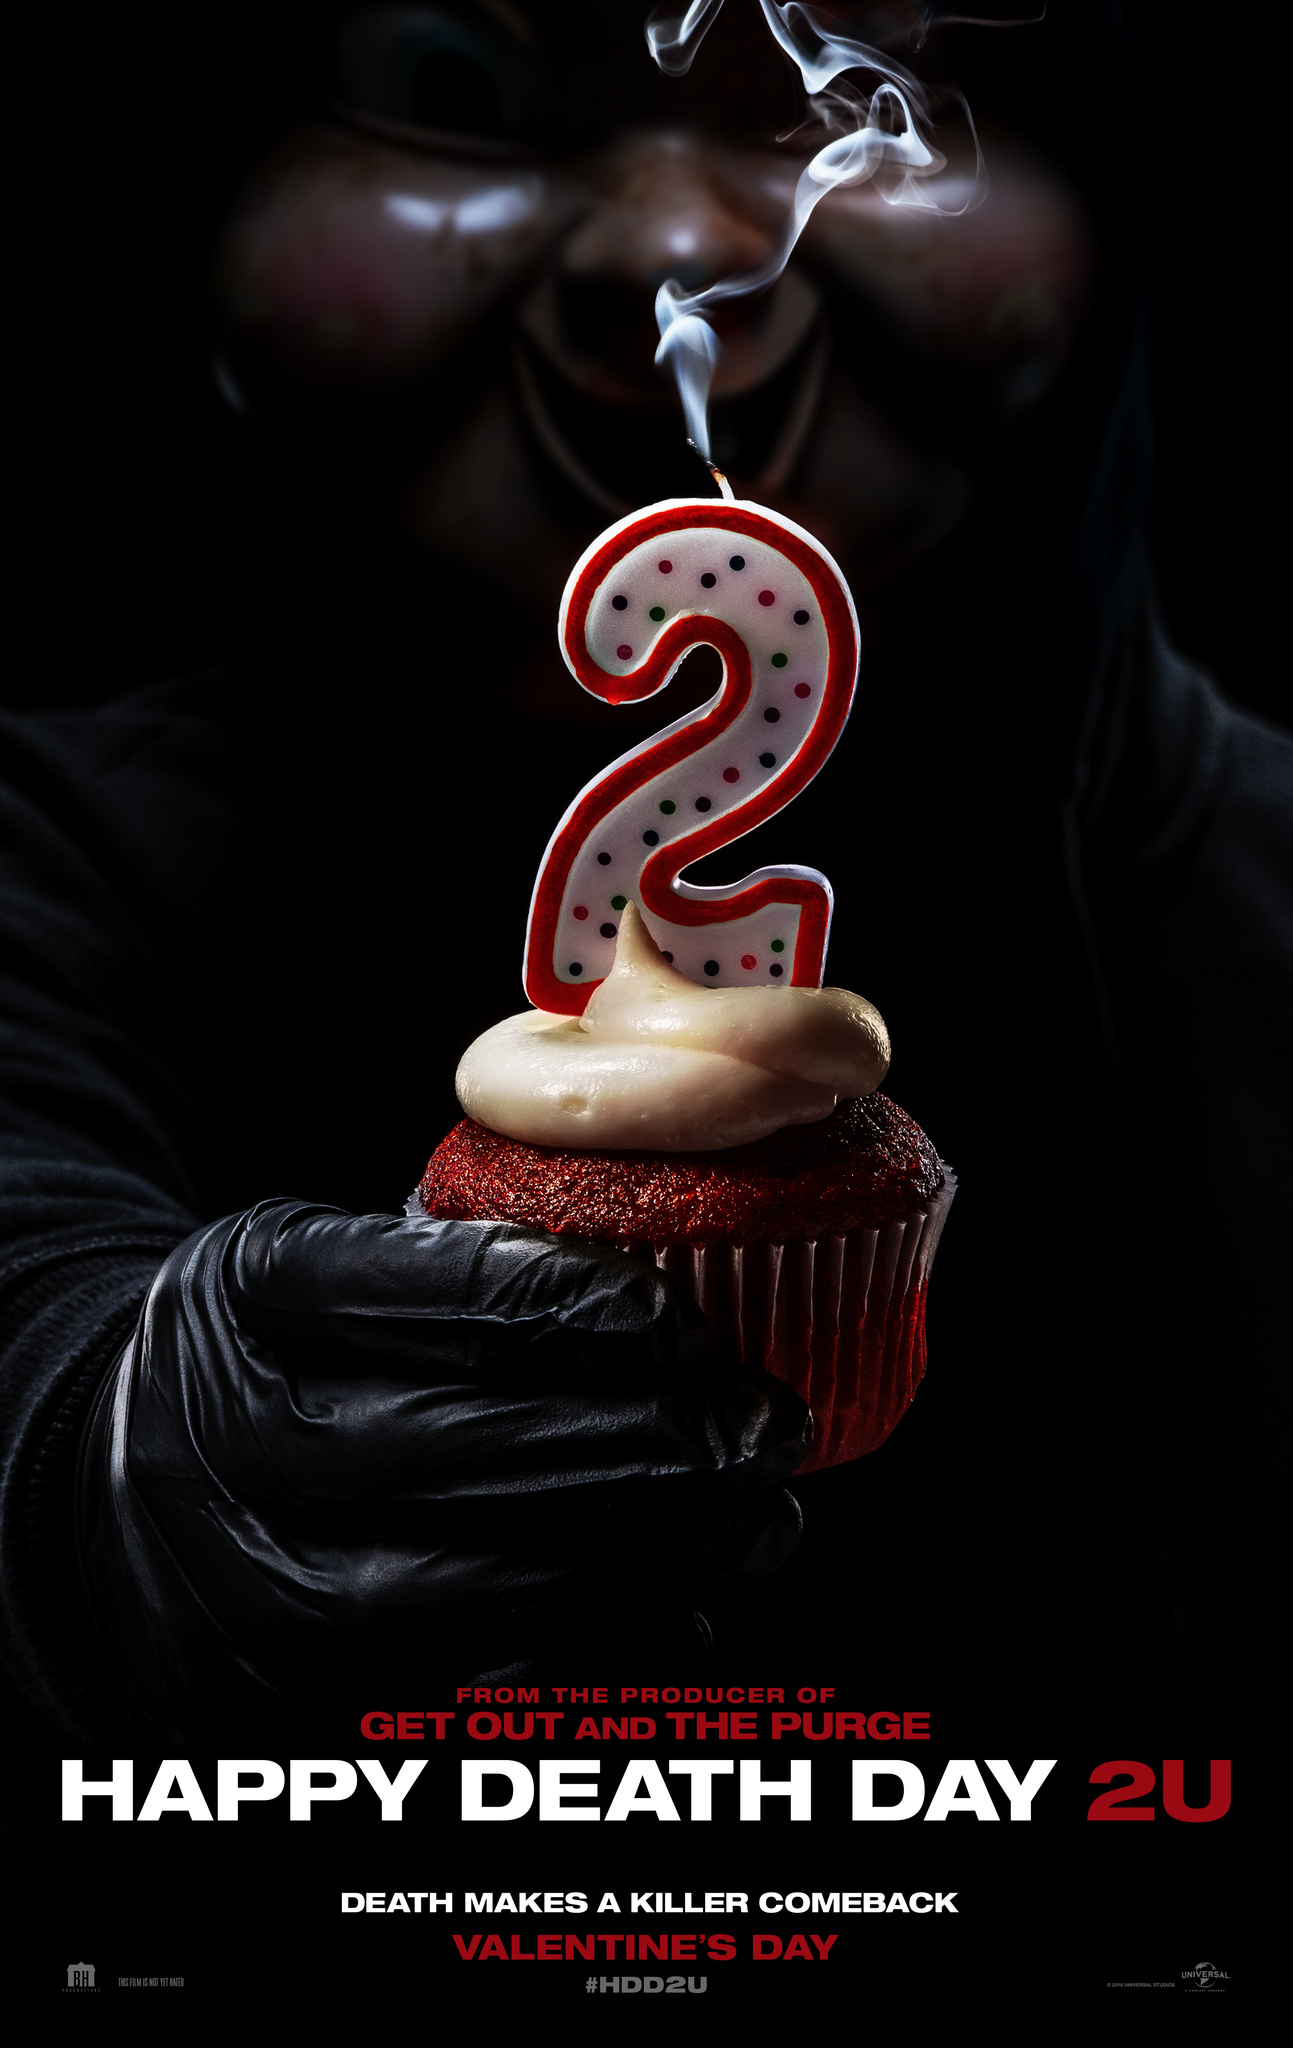 Happy Death Day 2U: The Time Loop is Back!